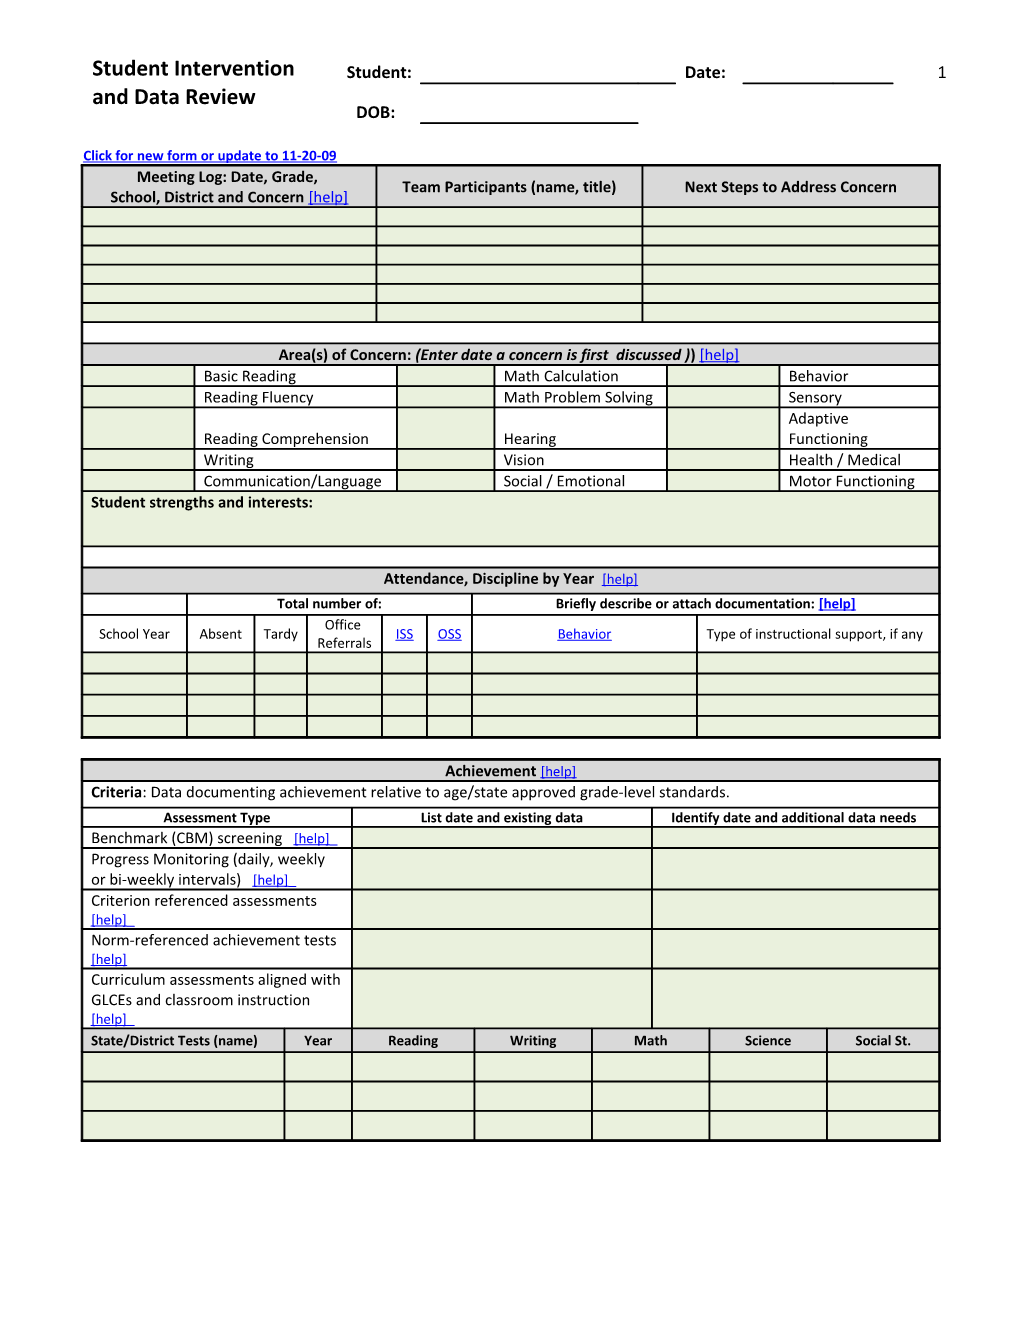 Click for New Form Or Update to 11-20-09